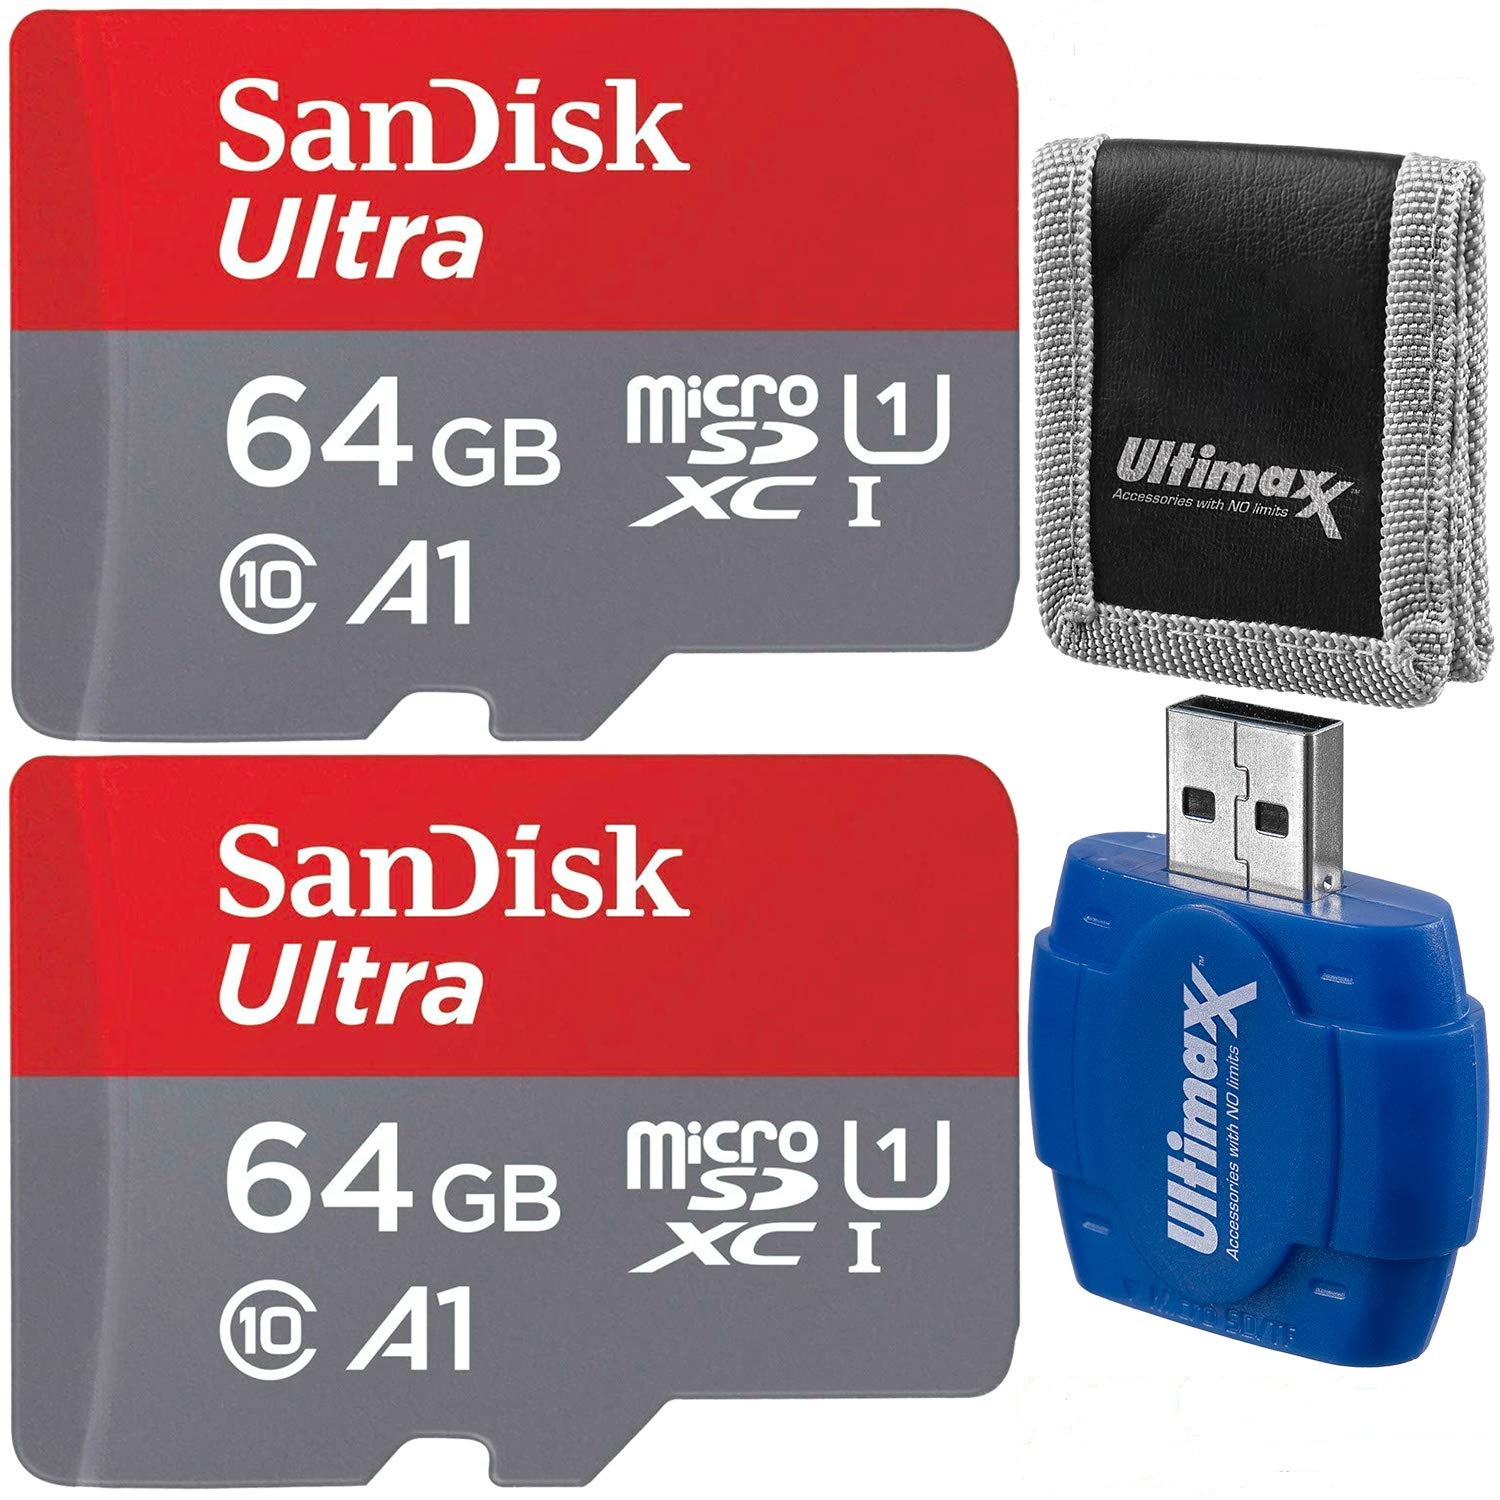 Dual SanDisk Ultra 64GB microSDXC UHS-I/Class-10 Memory Cards (2 Cards) Bundle with High Speed Memory Card Reader & Memory Card Wallet